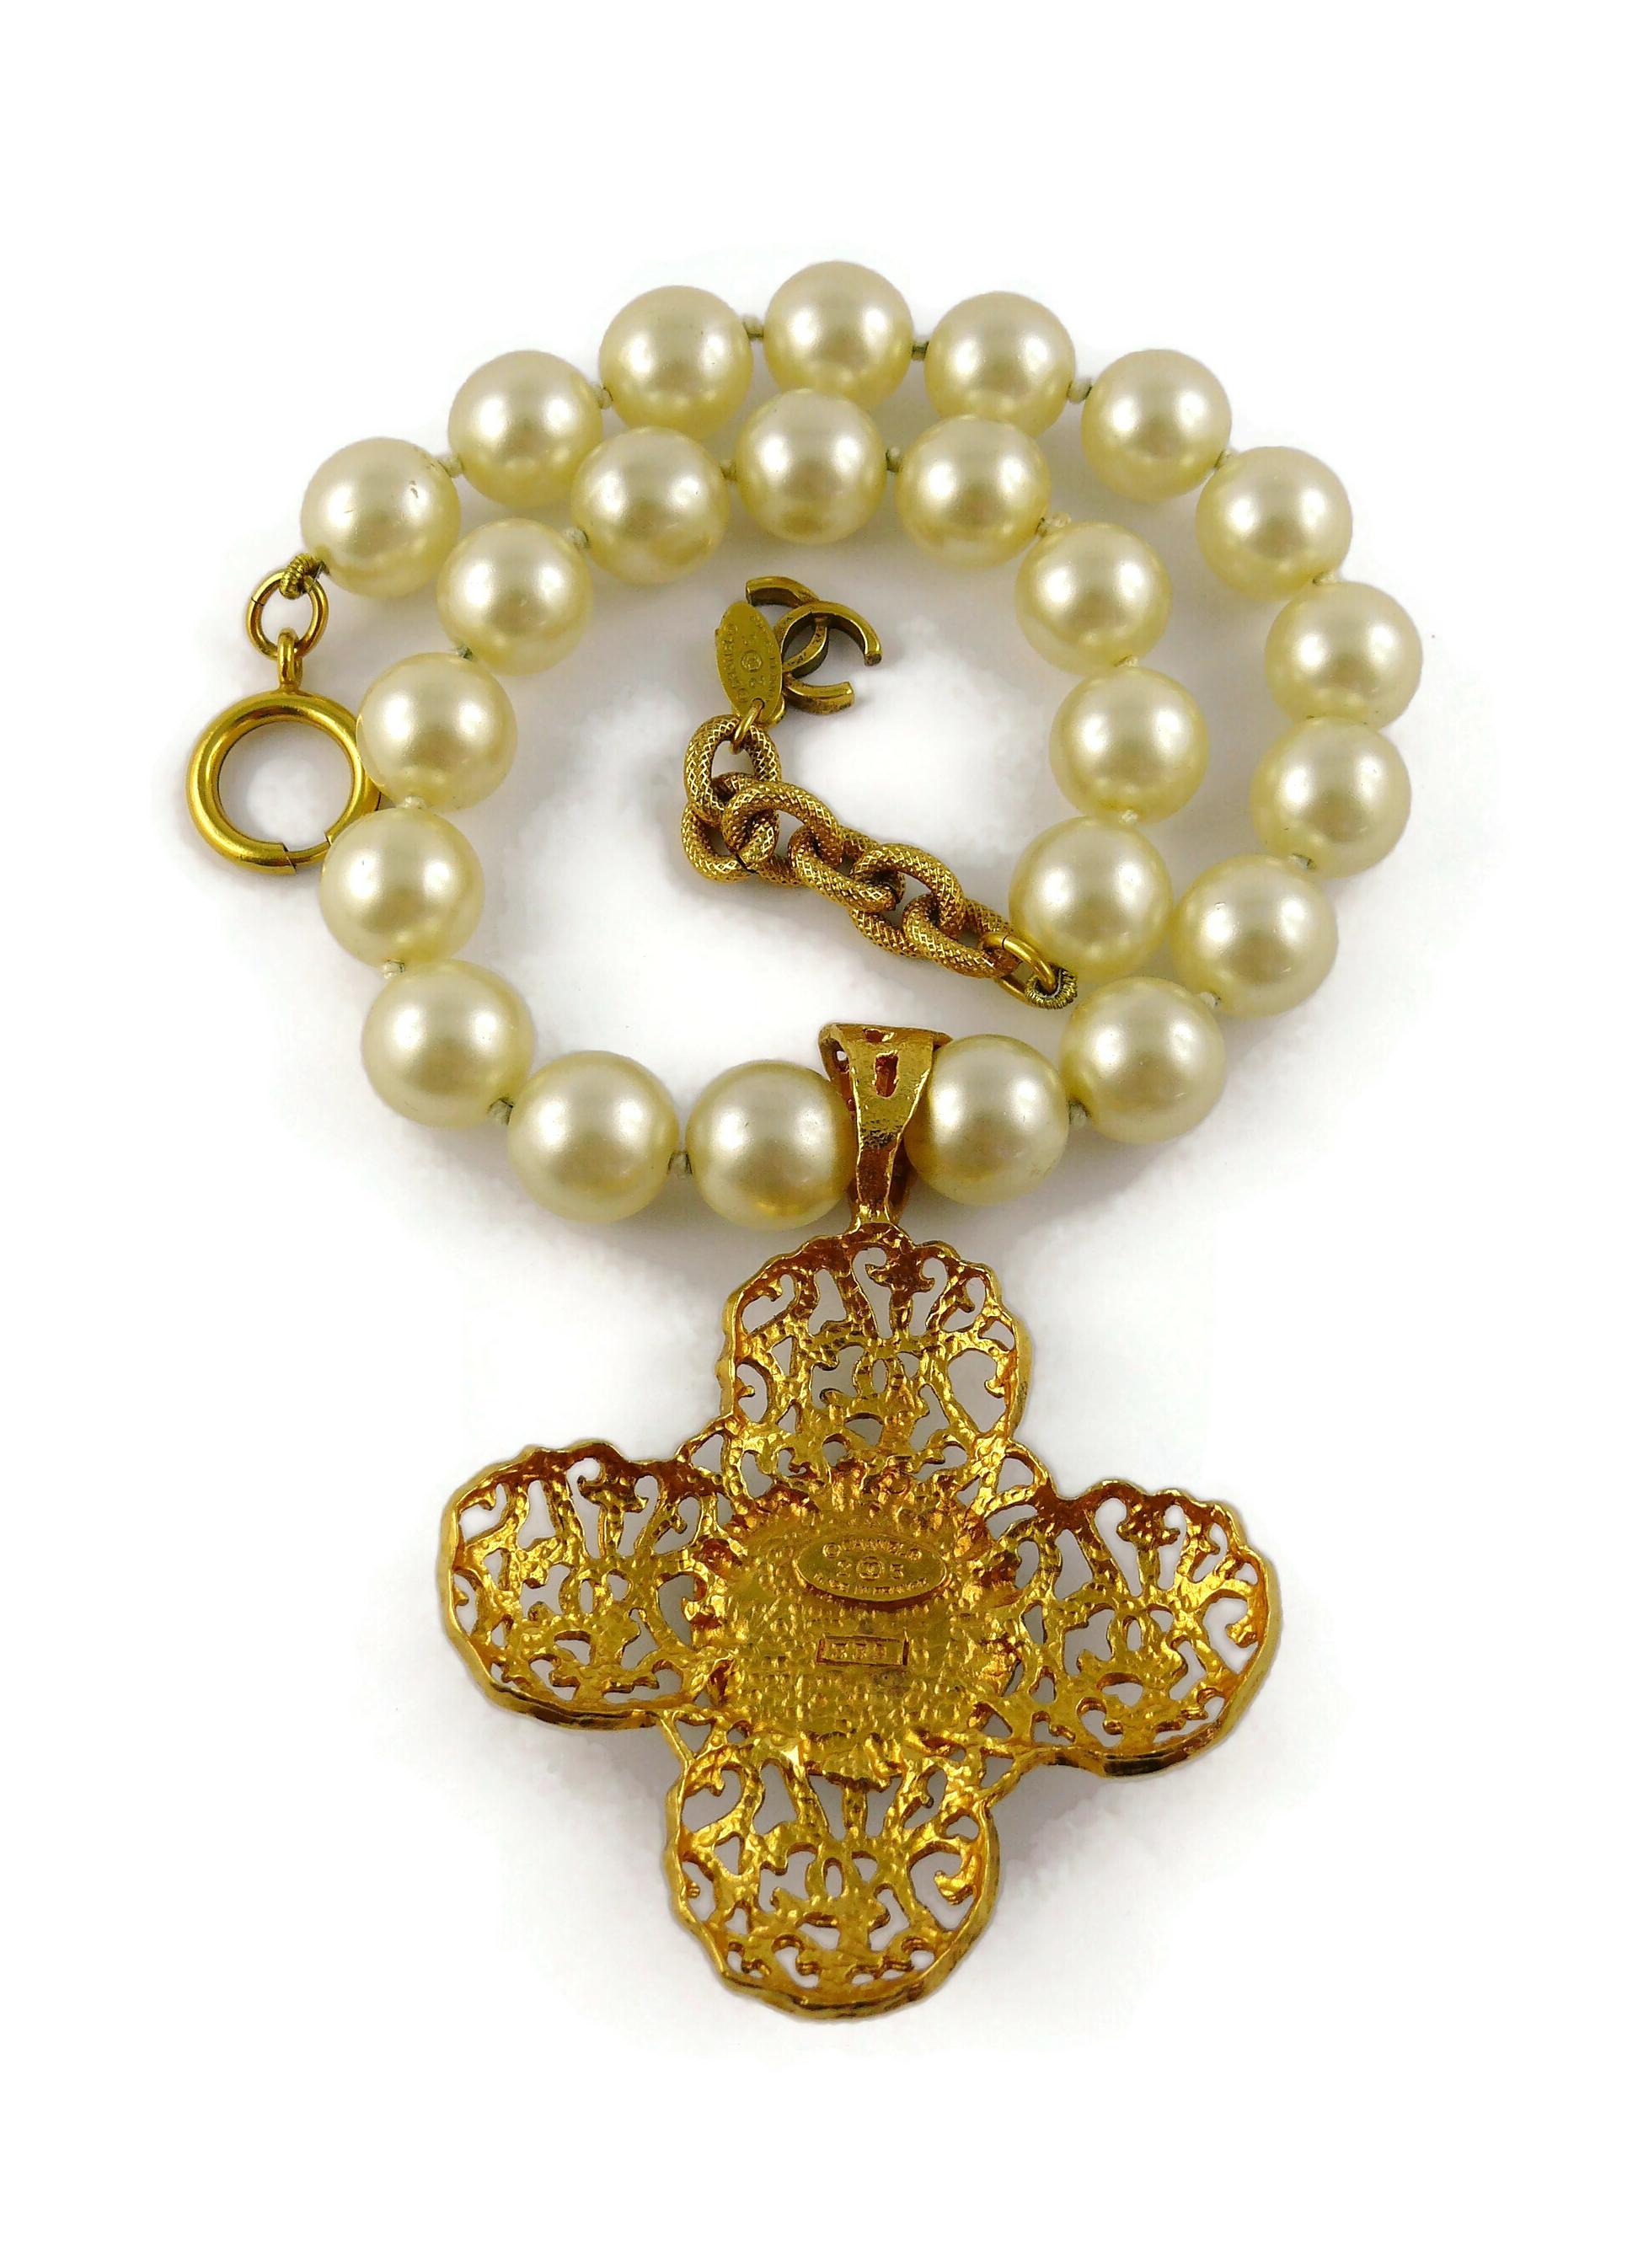 Chanel Vintage Pearl Necklace Openwork Cross Pendant Red Gripoix Cabochon For Sale 2